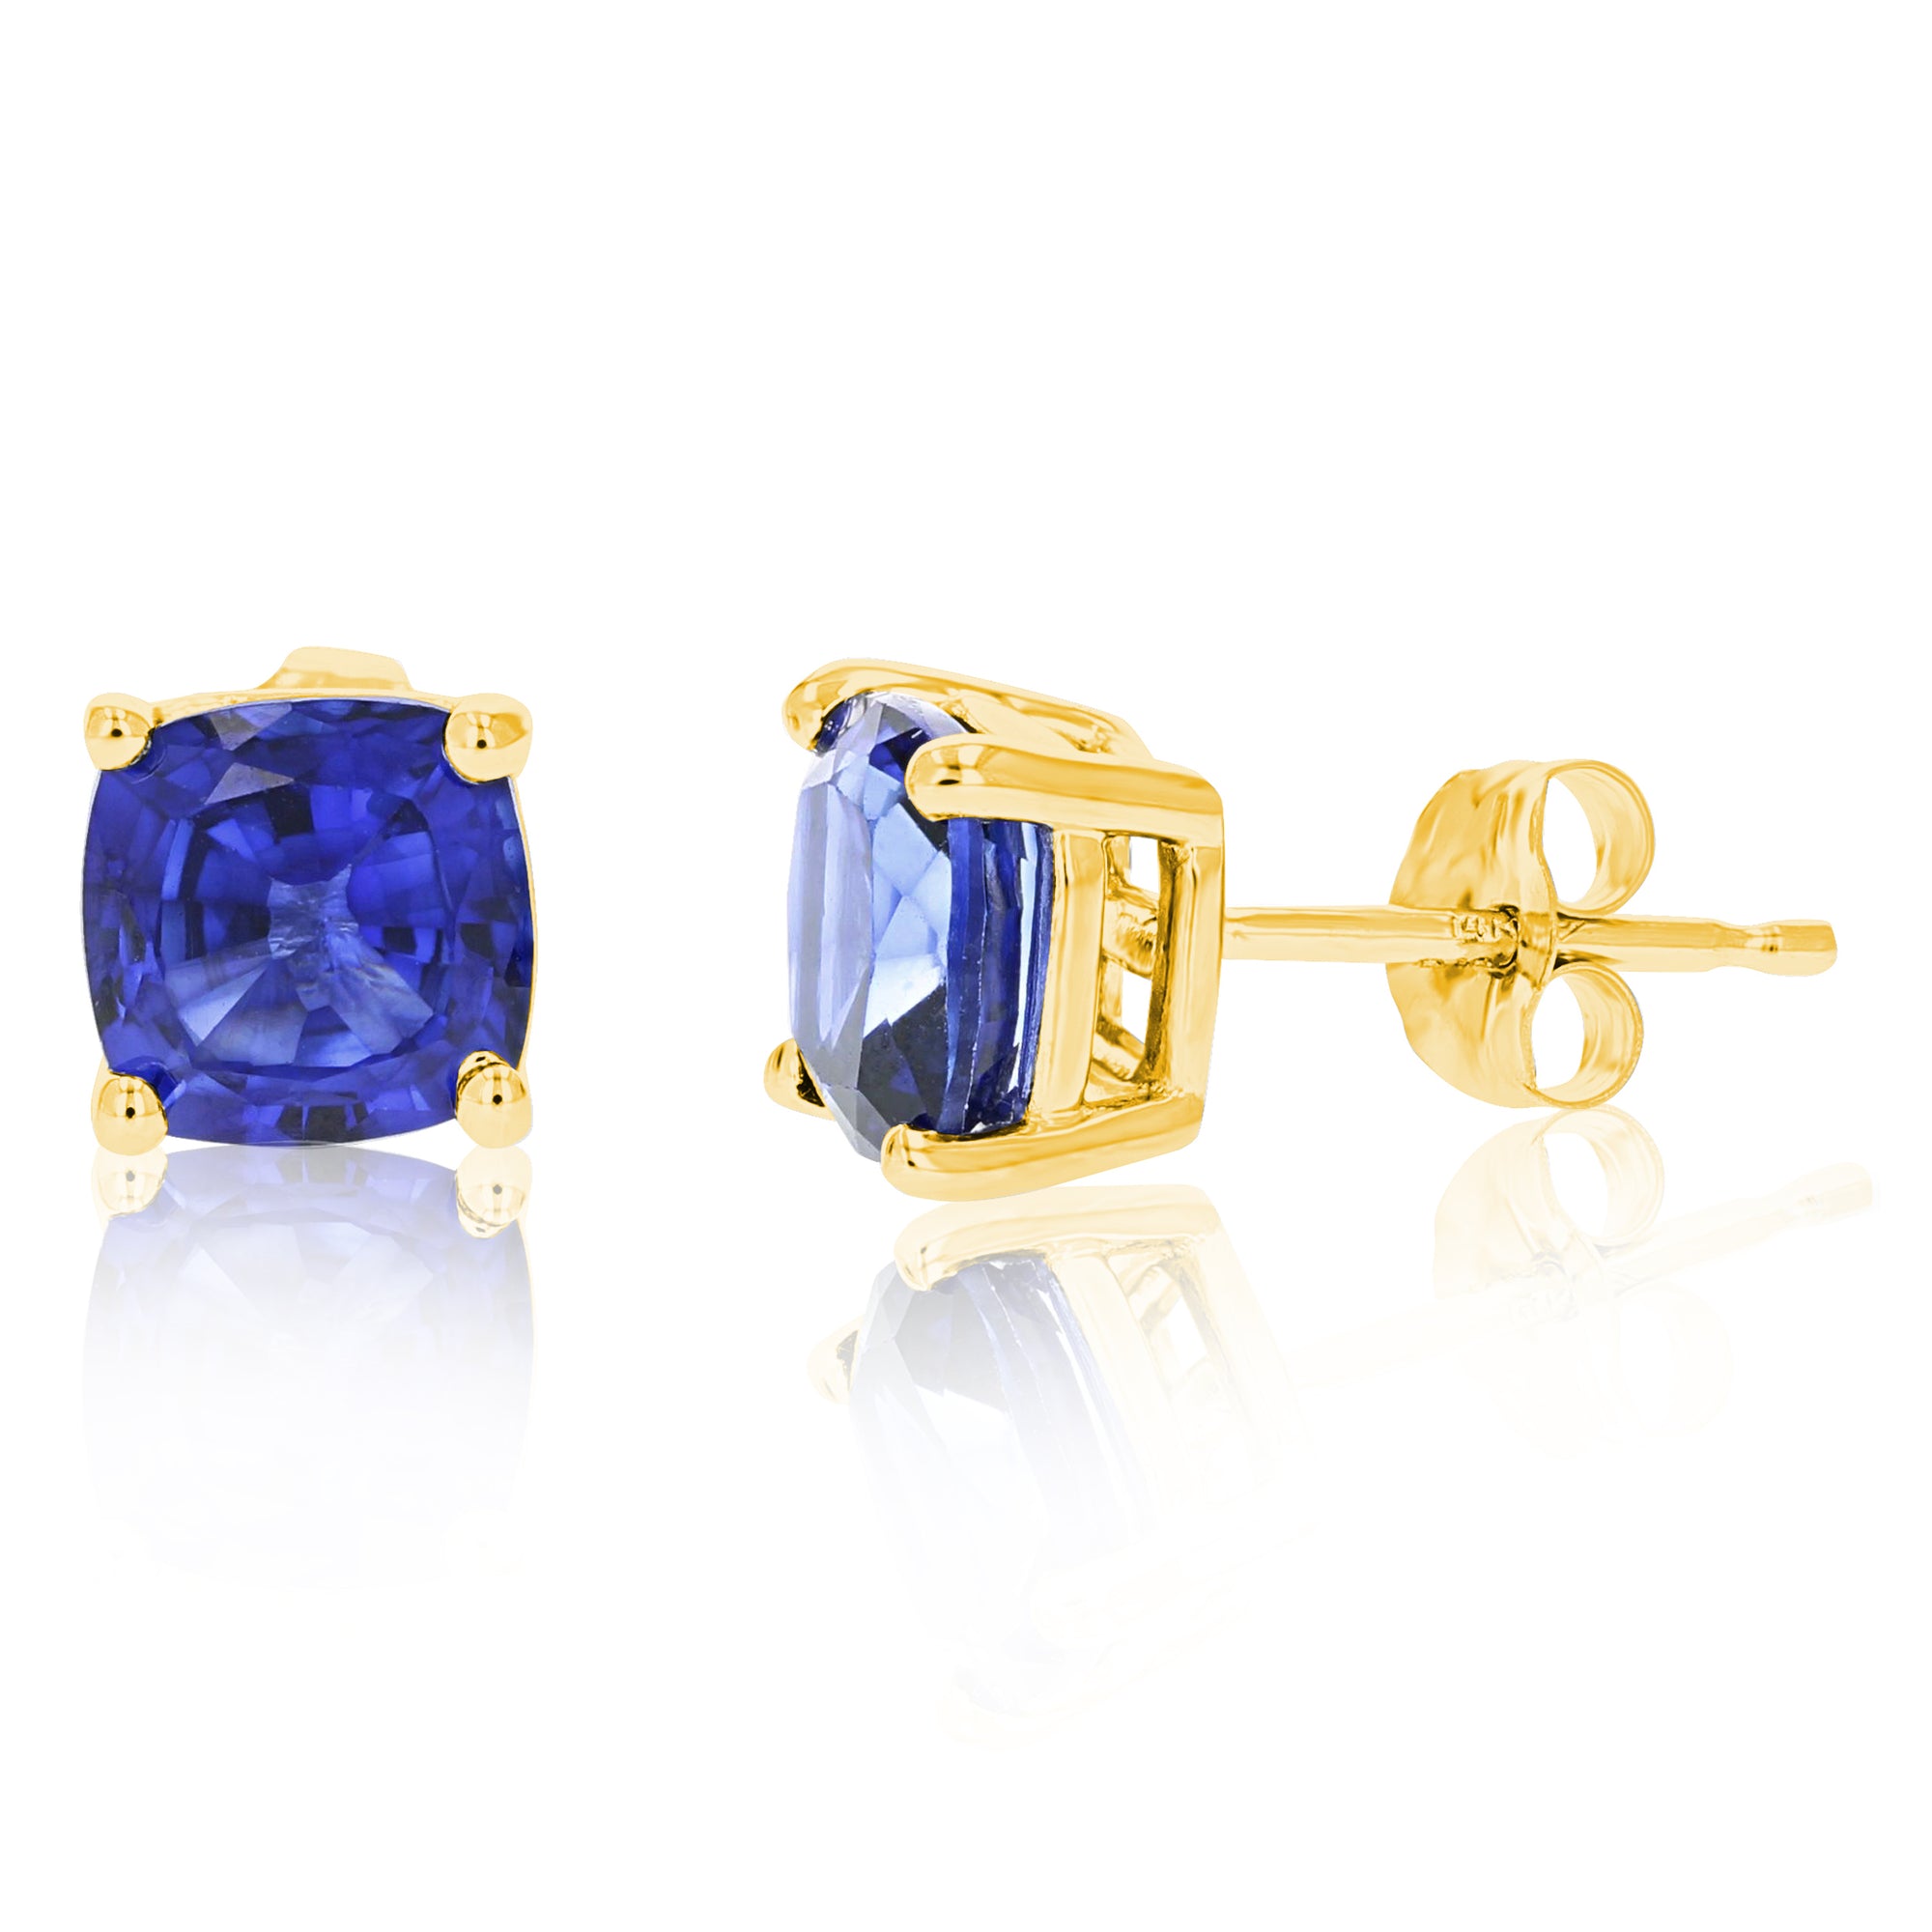 1.80 cttw 6 MM Created Blue Sapphire Stud Earrings 14K Yellow Gold Cushion Cut with Push Backs September Birthstone